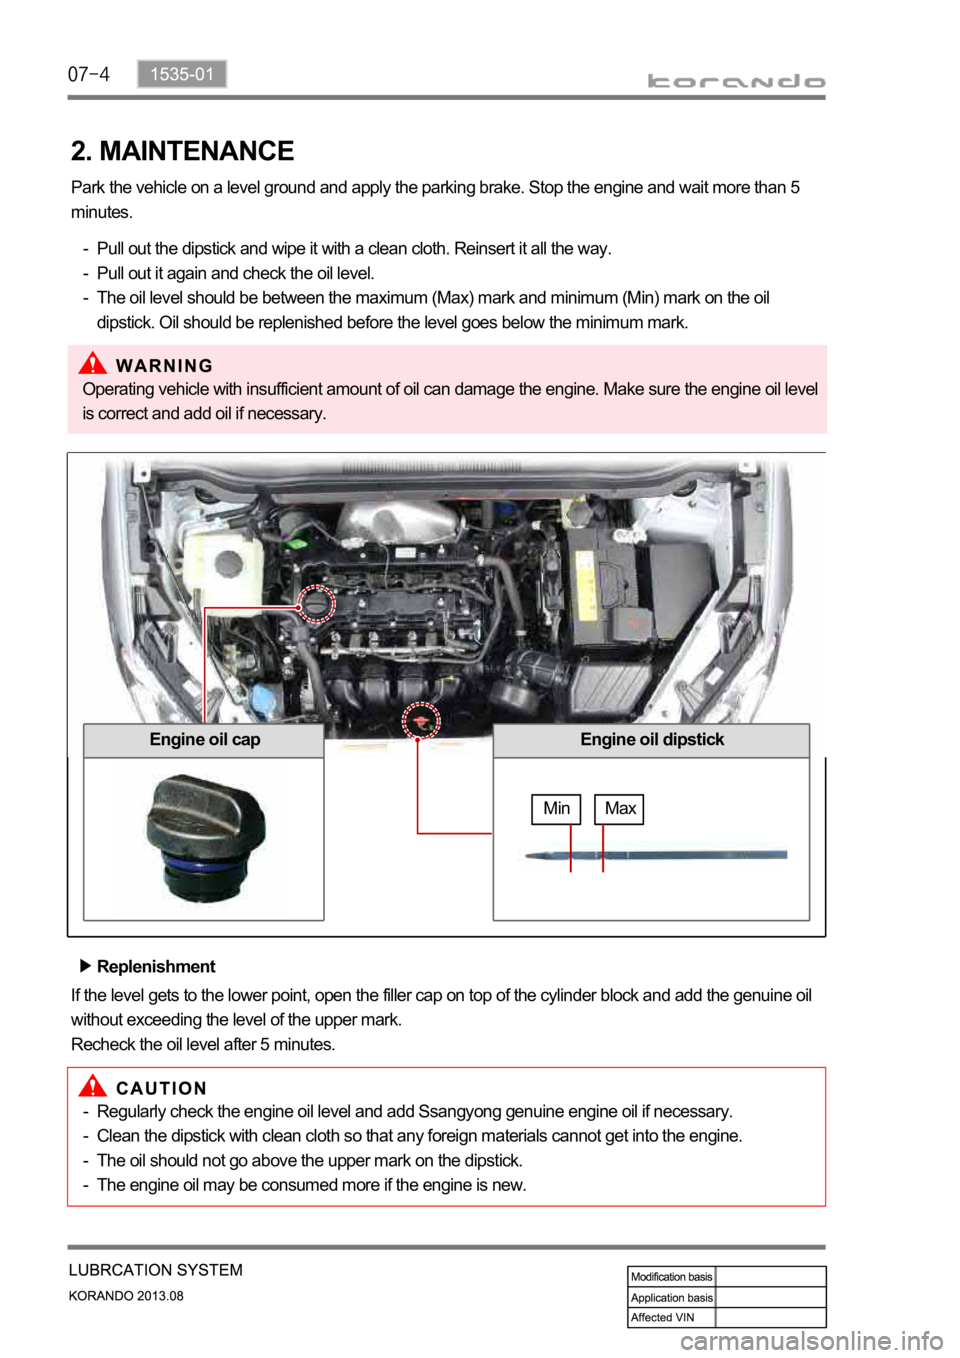 SSANGYONG KORANDO 2013 Workshop Manual 2. MAINTENANCE
Park the vehicle on a level ground and apply the parking brake. Stop the engine and wait more than 5 
minutes.
Pull out the dipstick and wipe it with a clean cloth. Reinsert it all the 